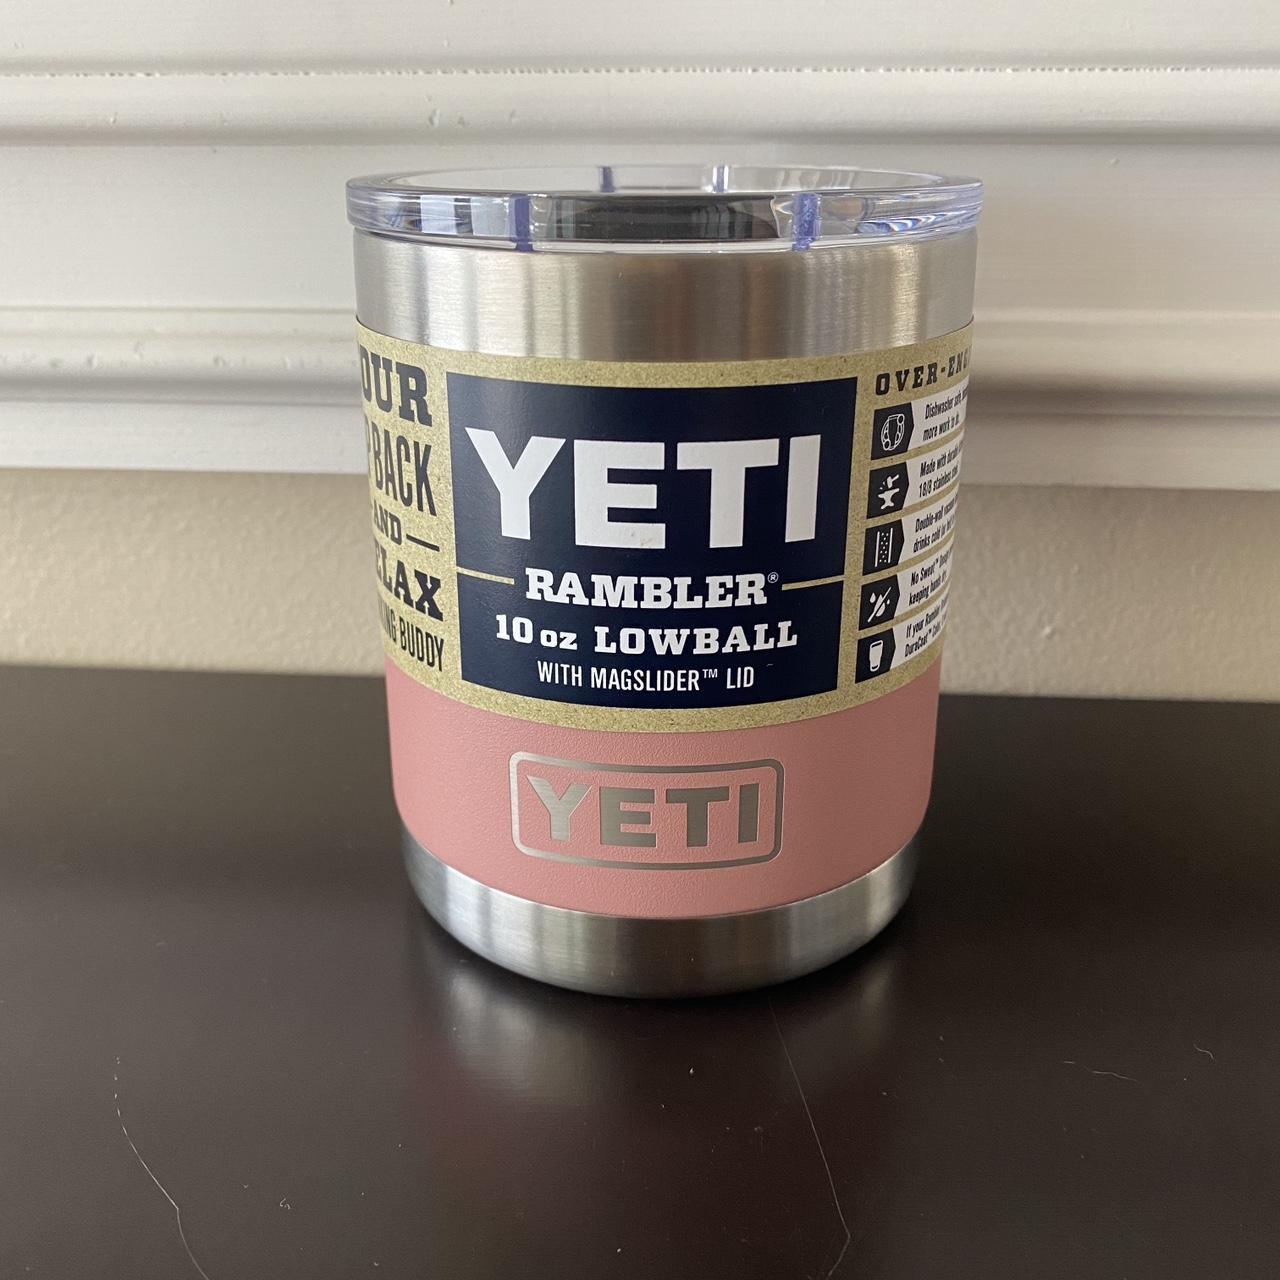 YETI Rambler 10 oz Lowball Insulated Tumbler Sandstone Pink New Without Tags